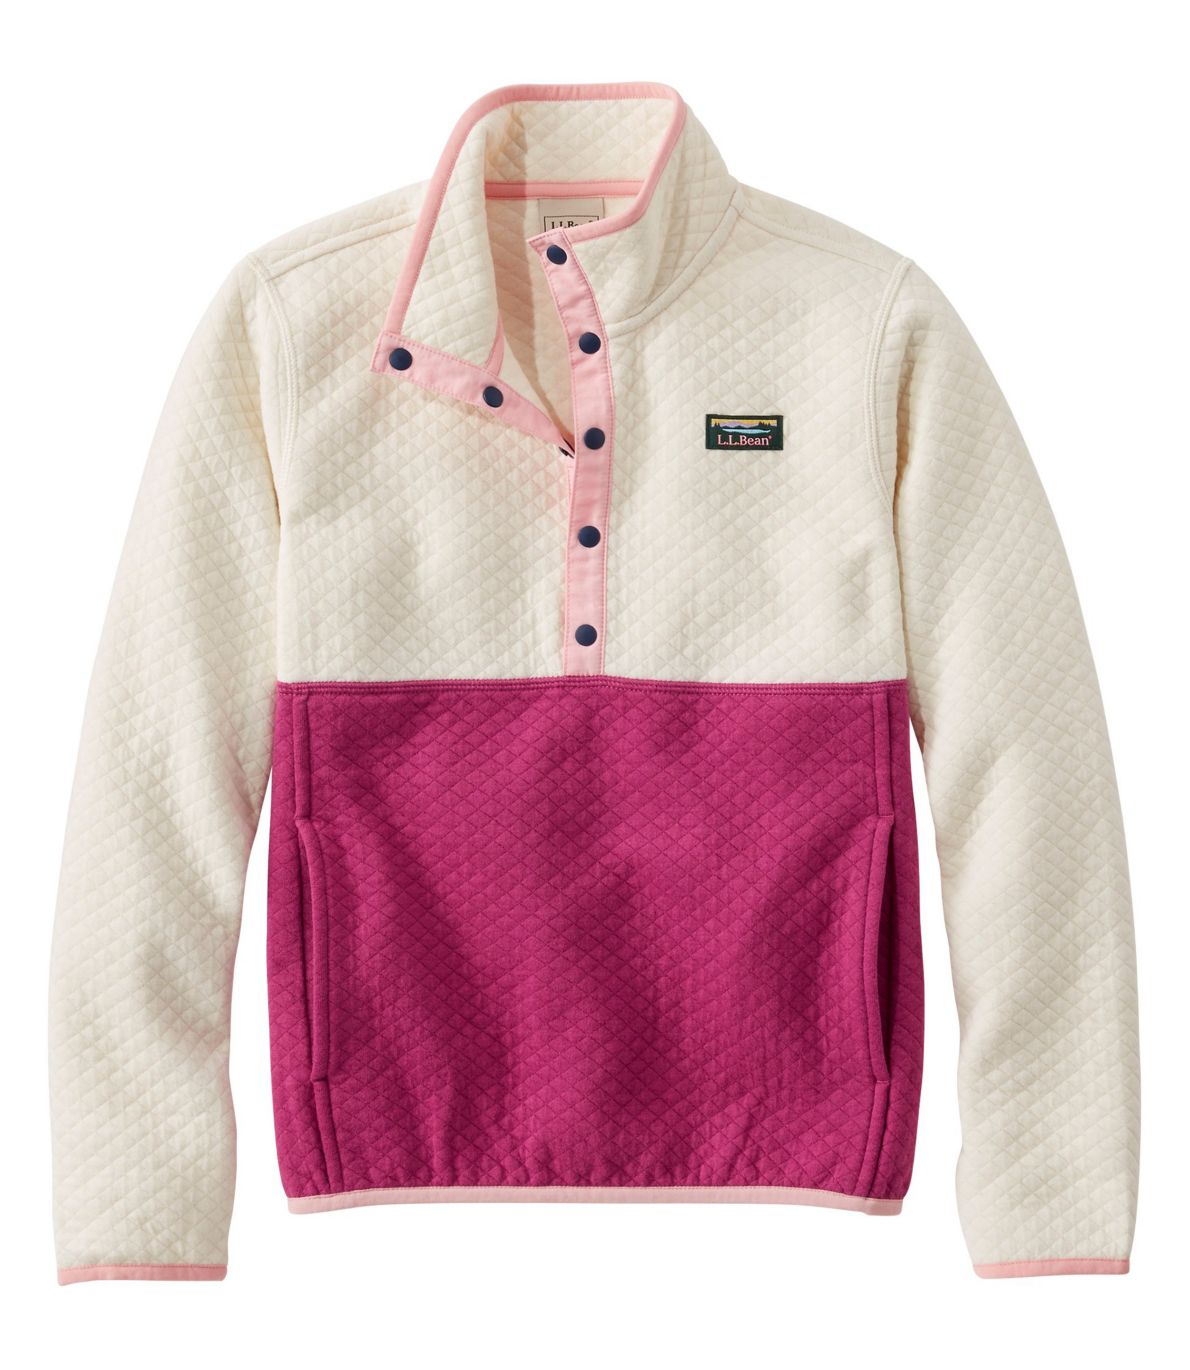 Kids' Quilted Quarter-Snap Pullover, Colorblock